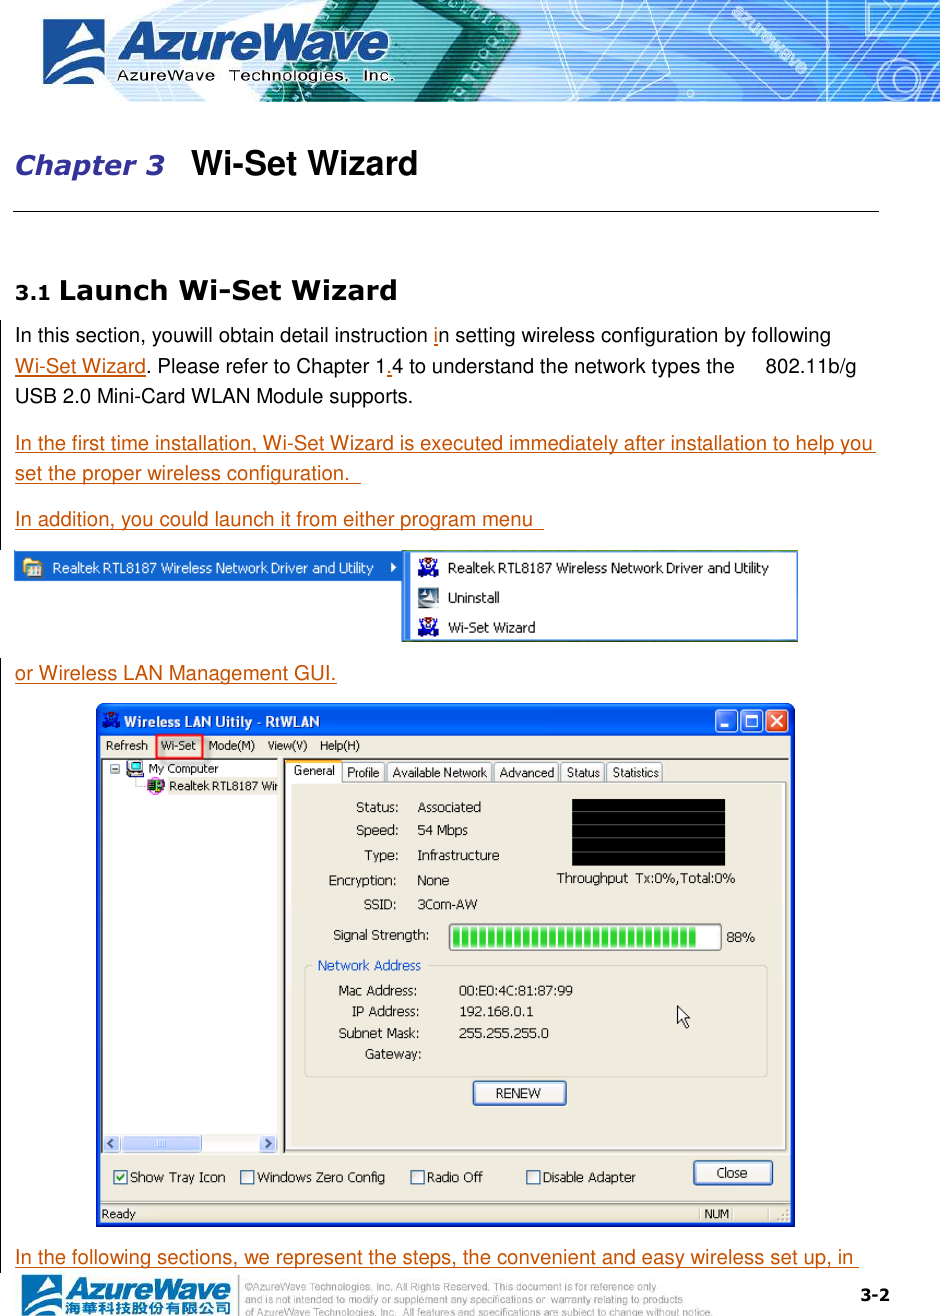  3-2 Chapter 3   Wi-Set Wizard  3.1 Launch Wi-Set Wizard In this section, youwill obtain detail instruction in setting wireless configuration by following Wi-Set Wizard. Please refer to Chapter 1.4 to understand the network types the      802.11b/g USB 2.0 Mini-Card WLAN Module supports. In the first time installation, Wi-Set Wizard is executed immediately after installation to help you set the proper wireless configuration.   In addition, you could launch it from either program menu    or Wireless LAN Management GUI.  In the following sections, we represent the steps, the convenient and easy wireless set up, in 